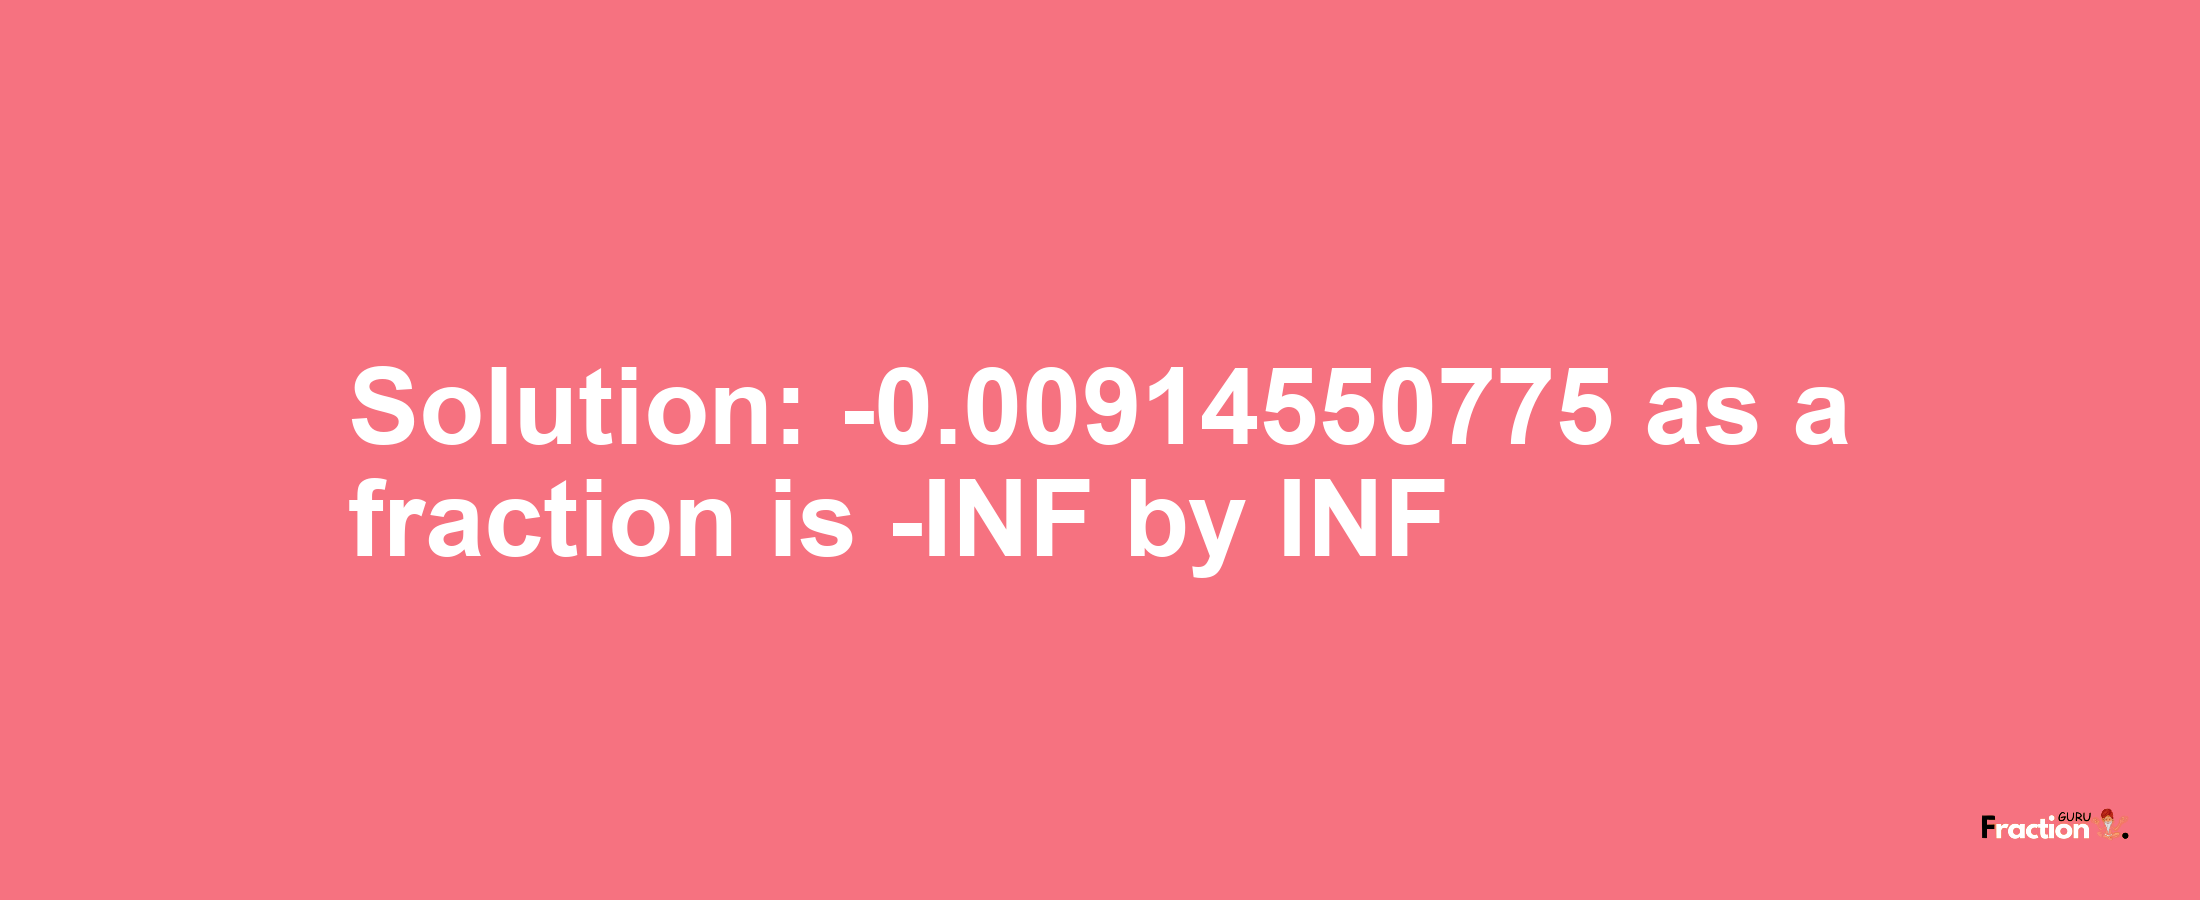 Solution:-0.00914550775 as a fraction is -INF/INF